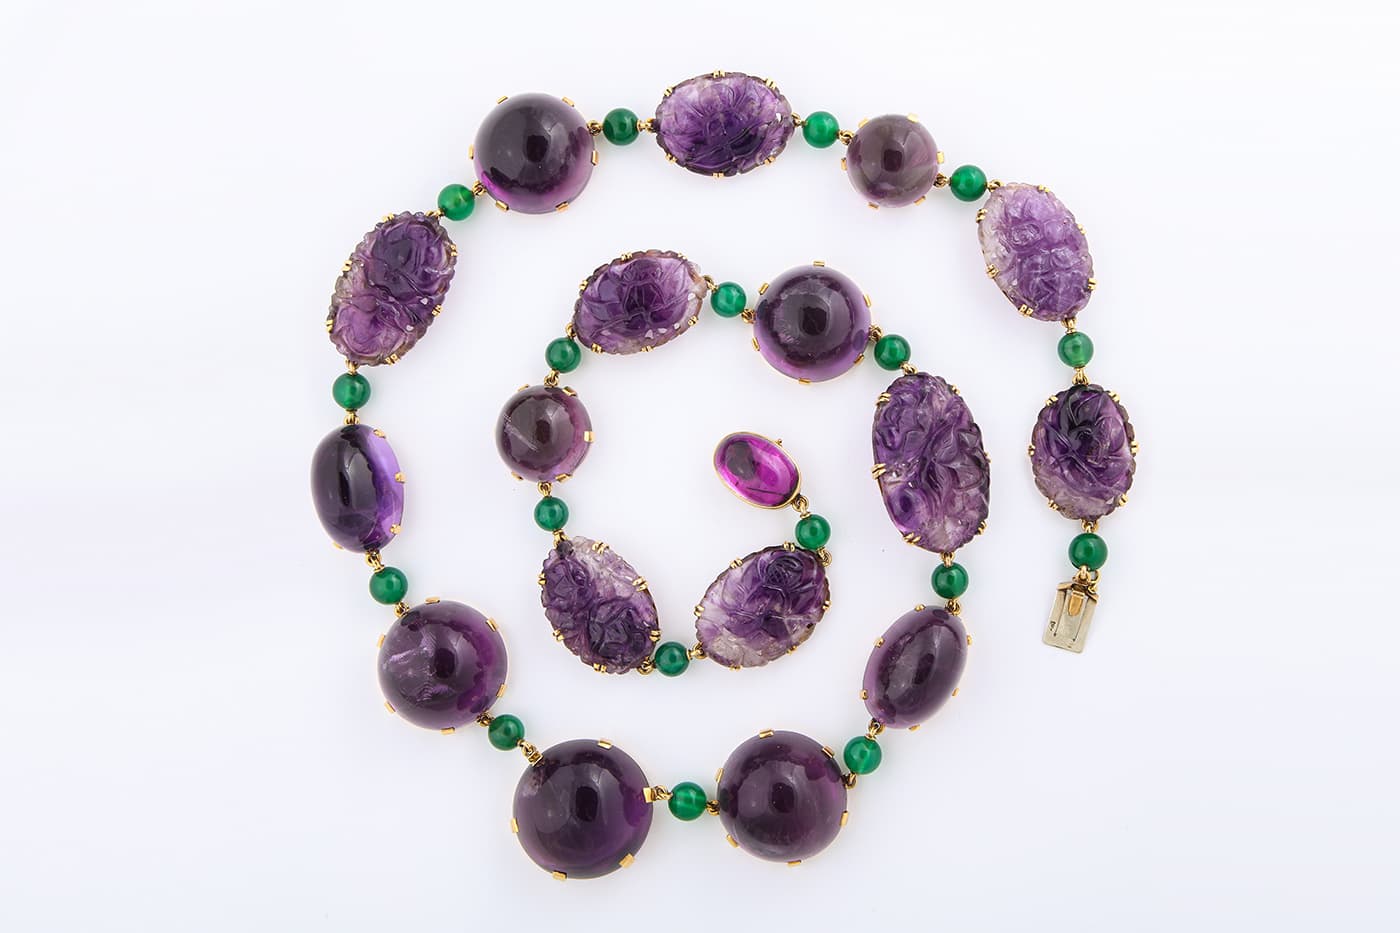 René Boivin 1950s cabochon and carved amethyst necklace and bracelet, interspersed with chrysoprase beads, in 18 carat gold. Sold by A La Vieille Russie